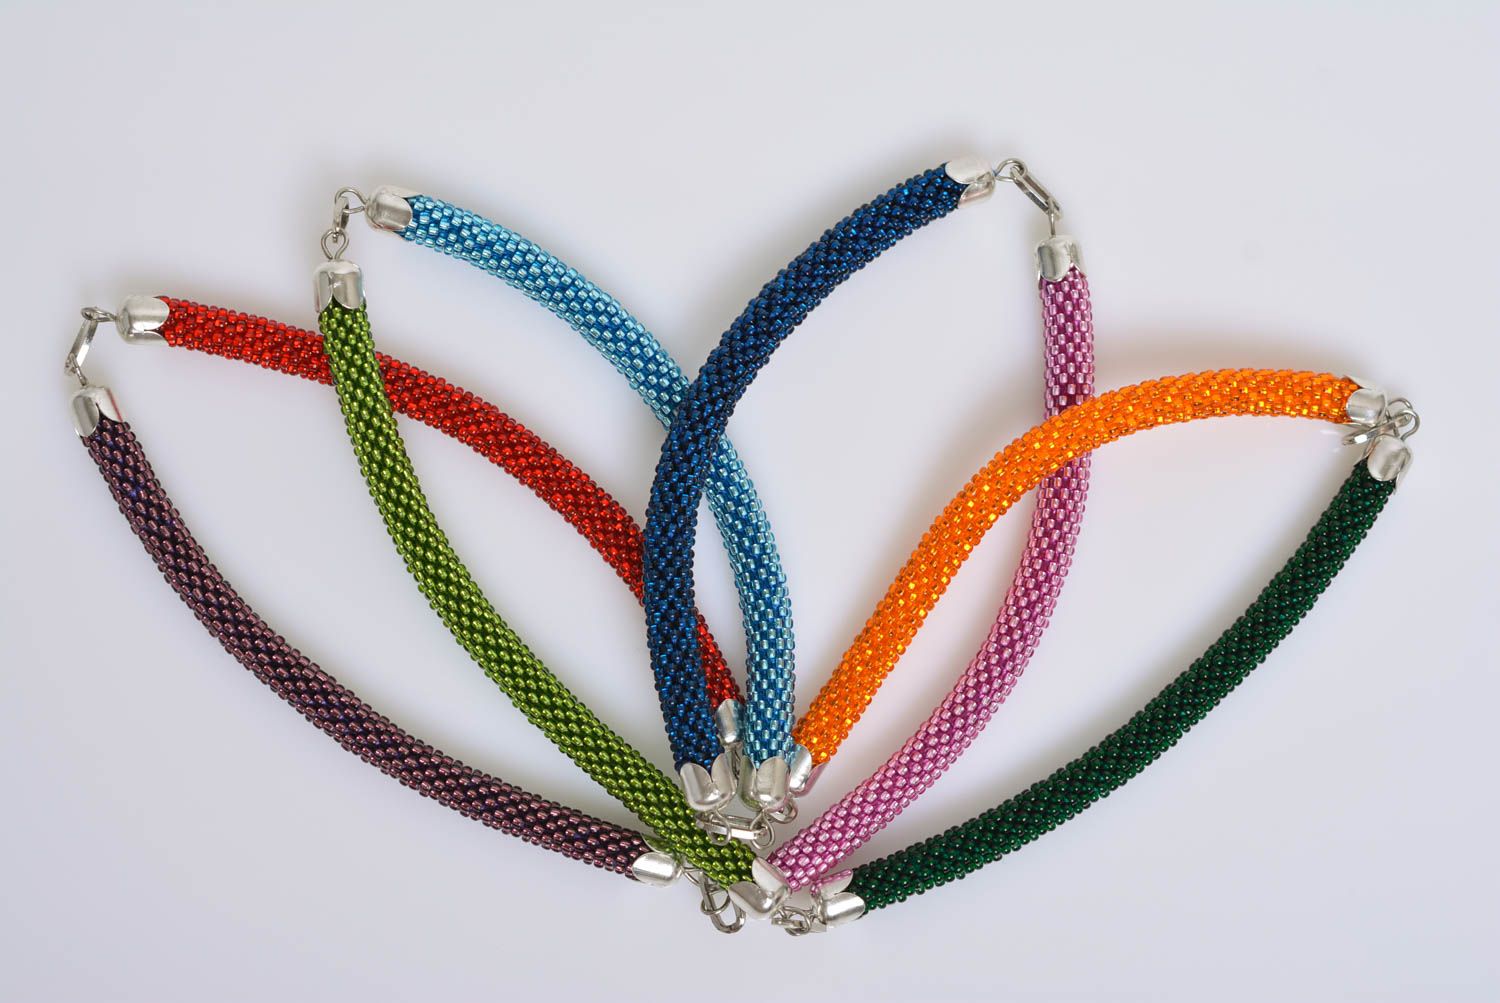 Handmade designer long bead woven cord necklace with bright colorful elements photo 2